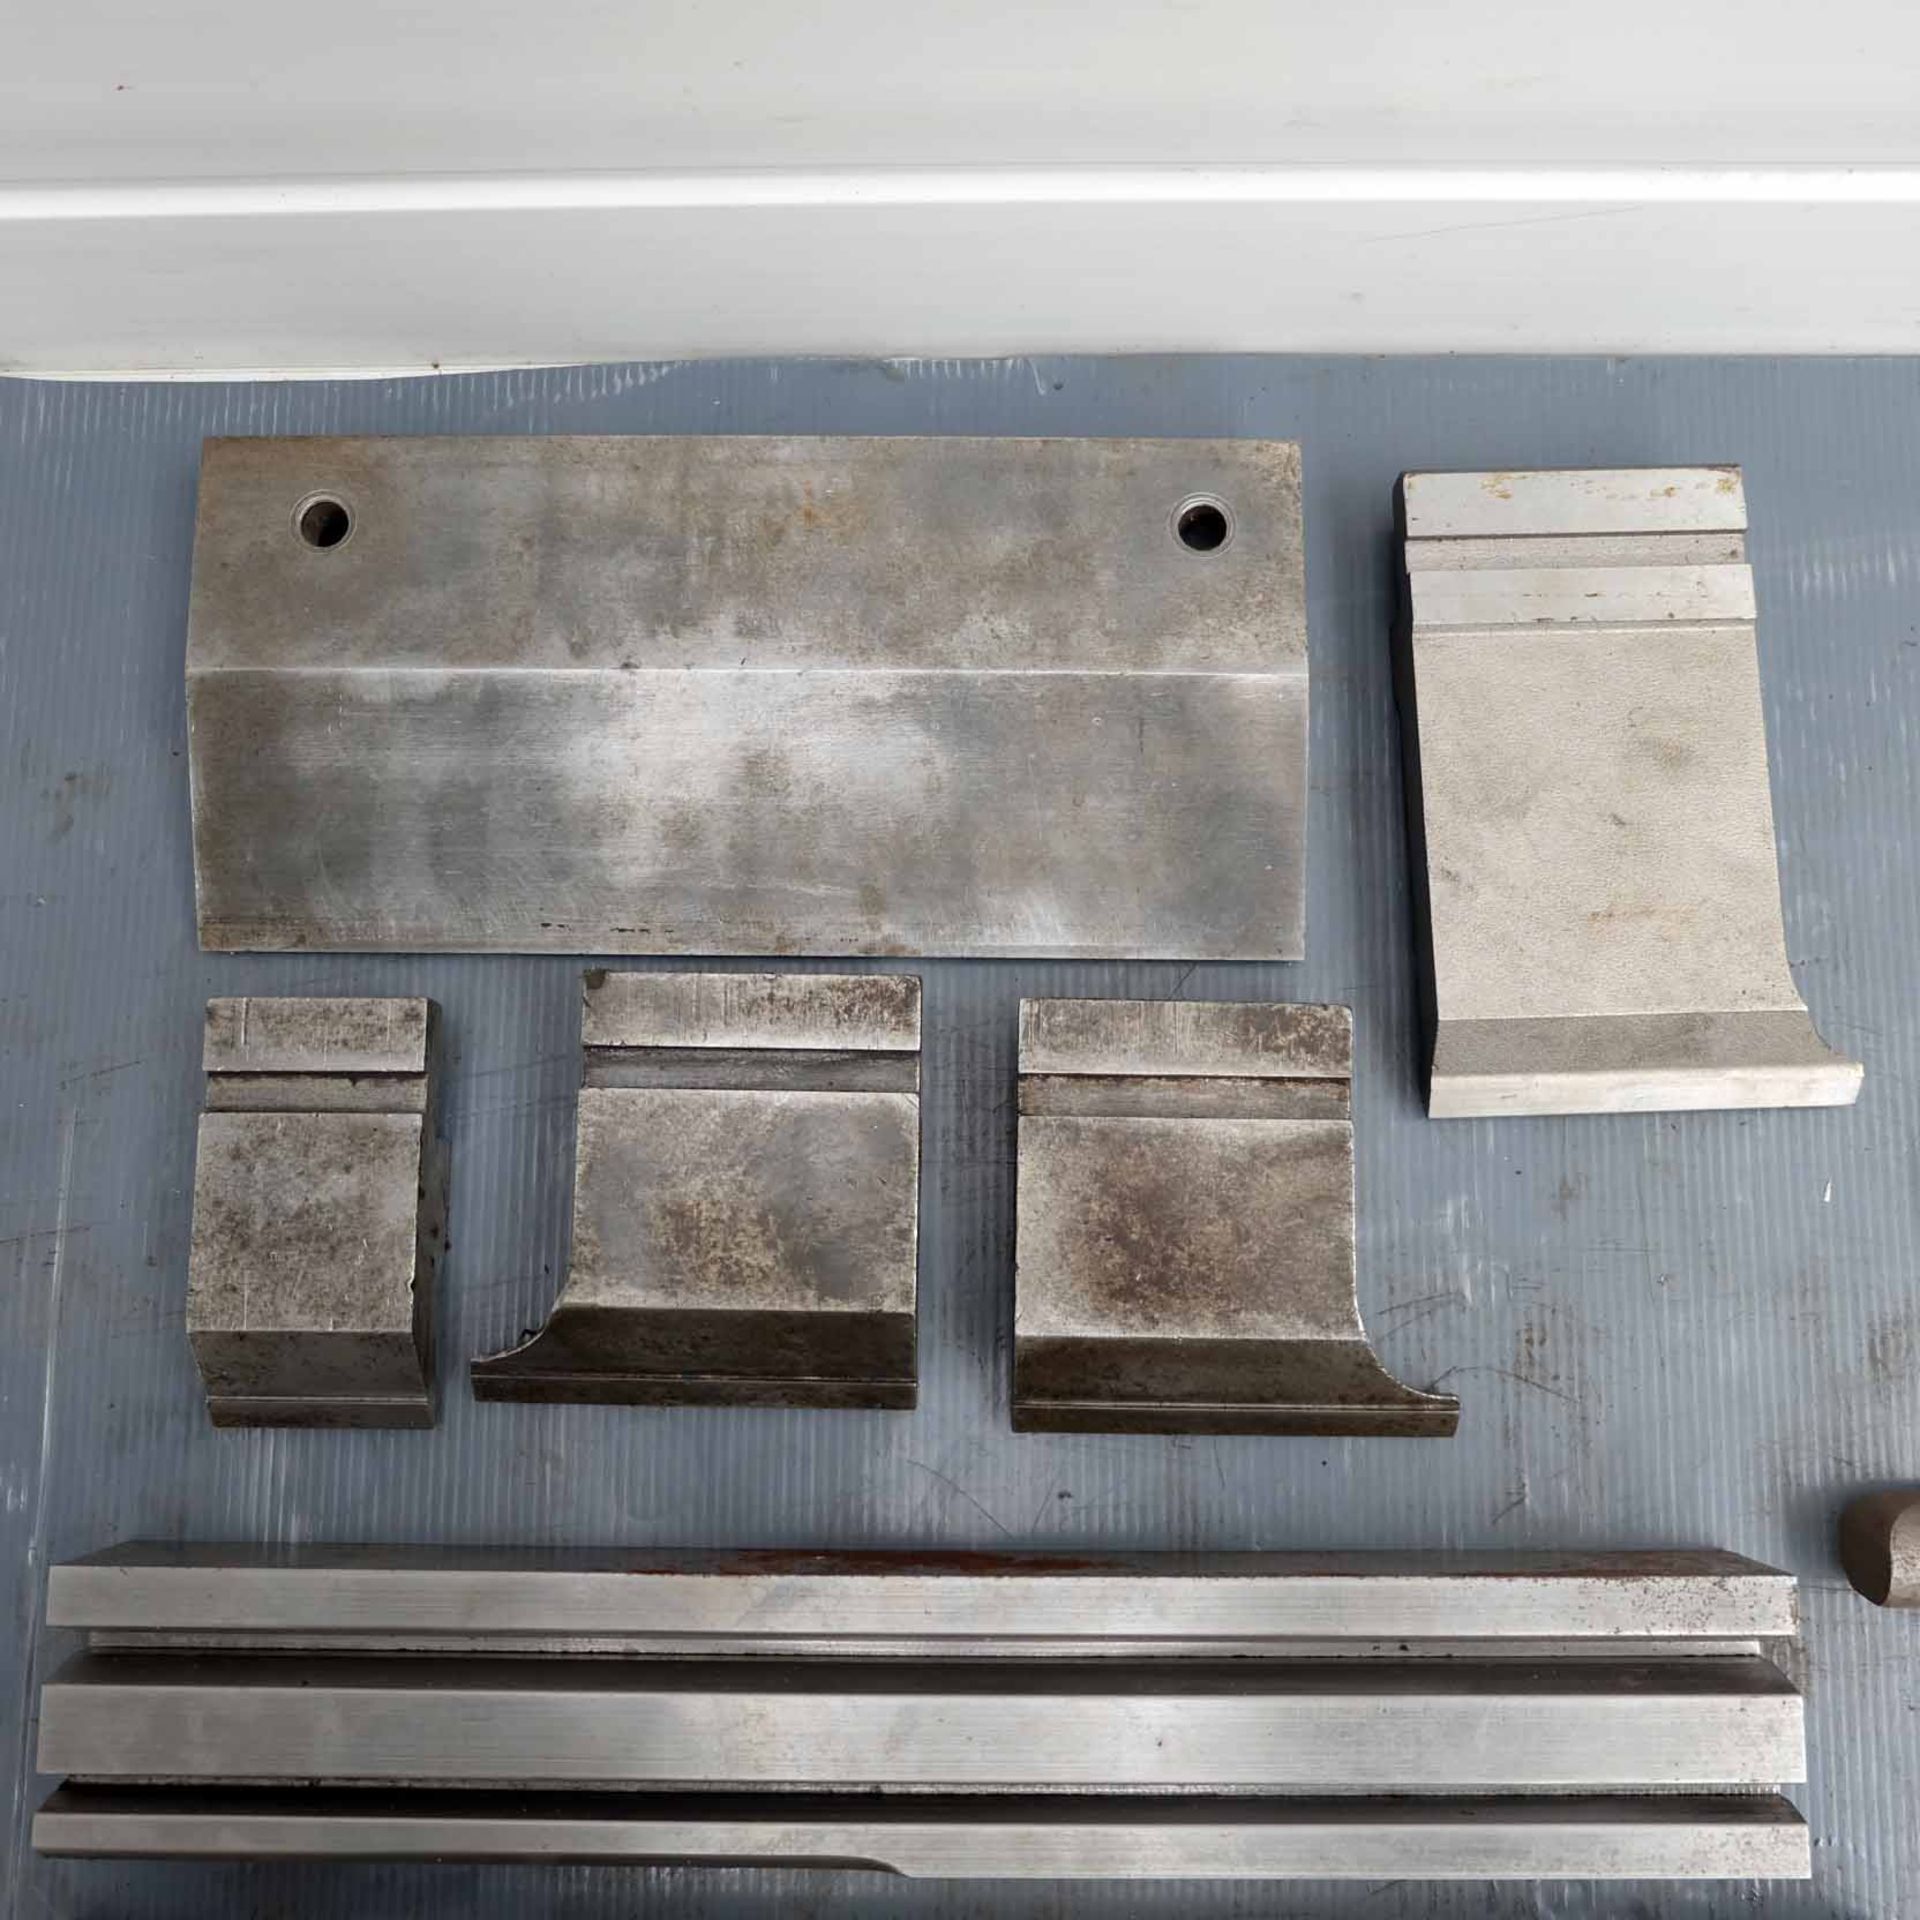 Quantity of Miscalaneous Press Brake Tooling. Various Sizes. Top & Bottom Tooling. - Image 3 of 6